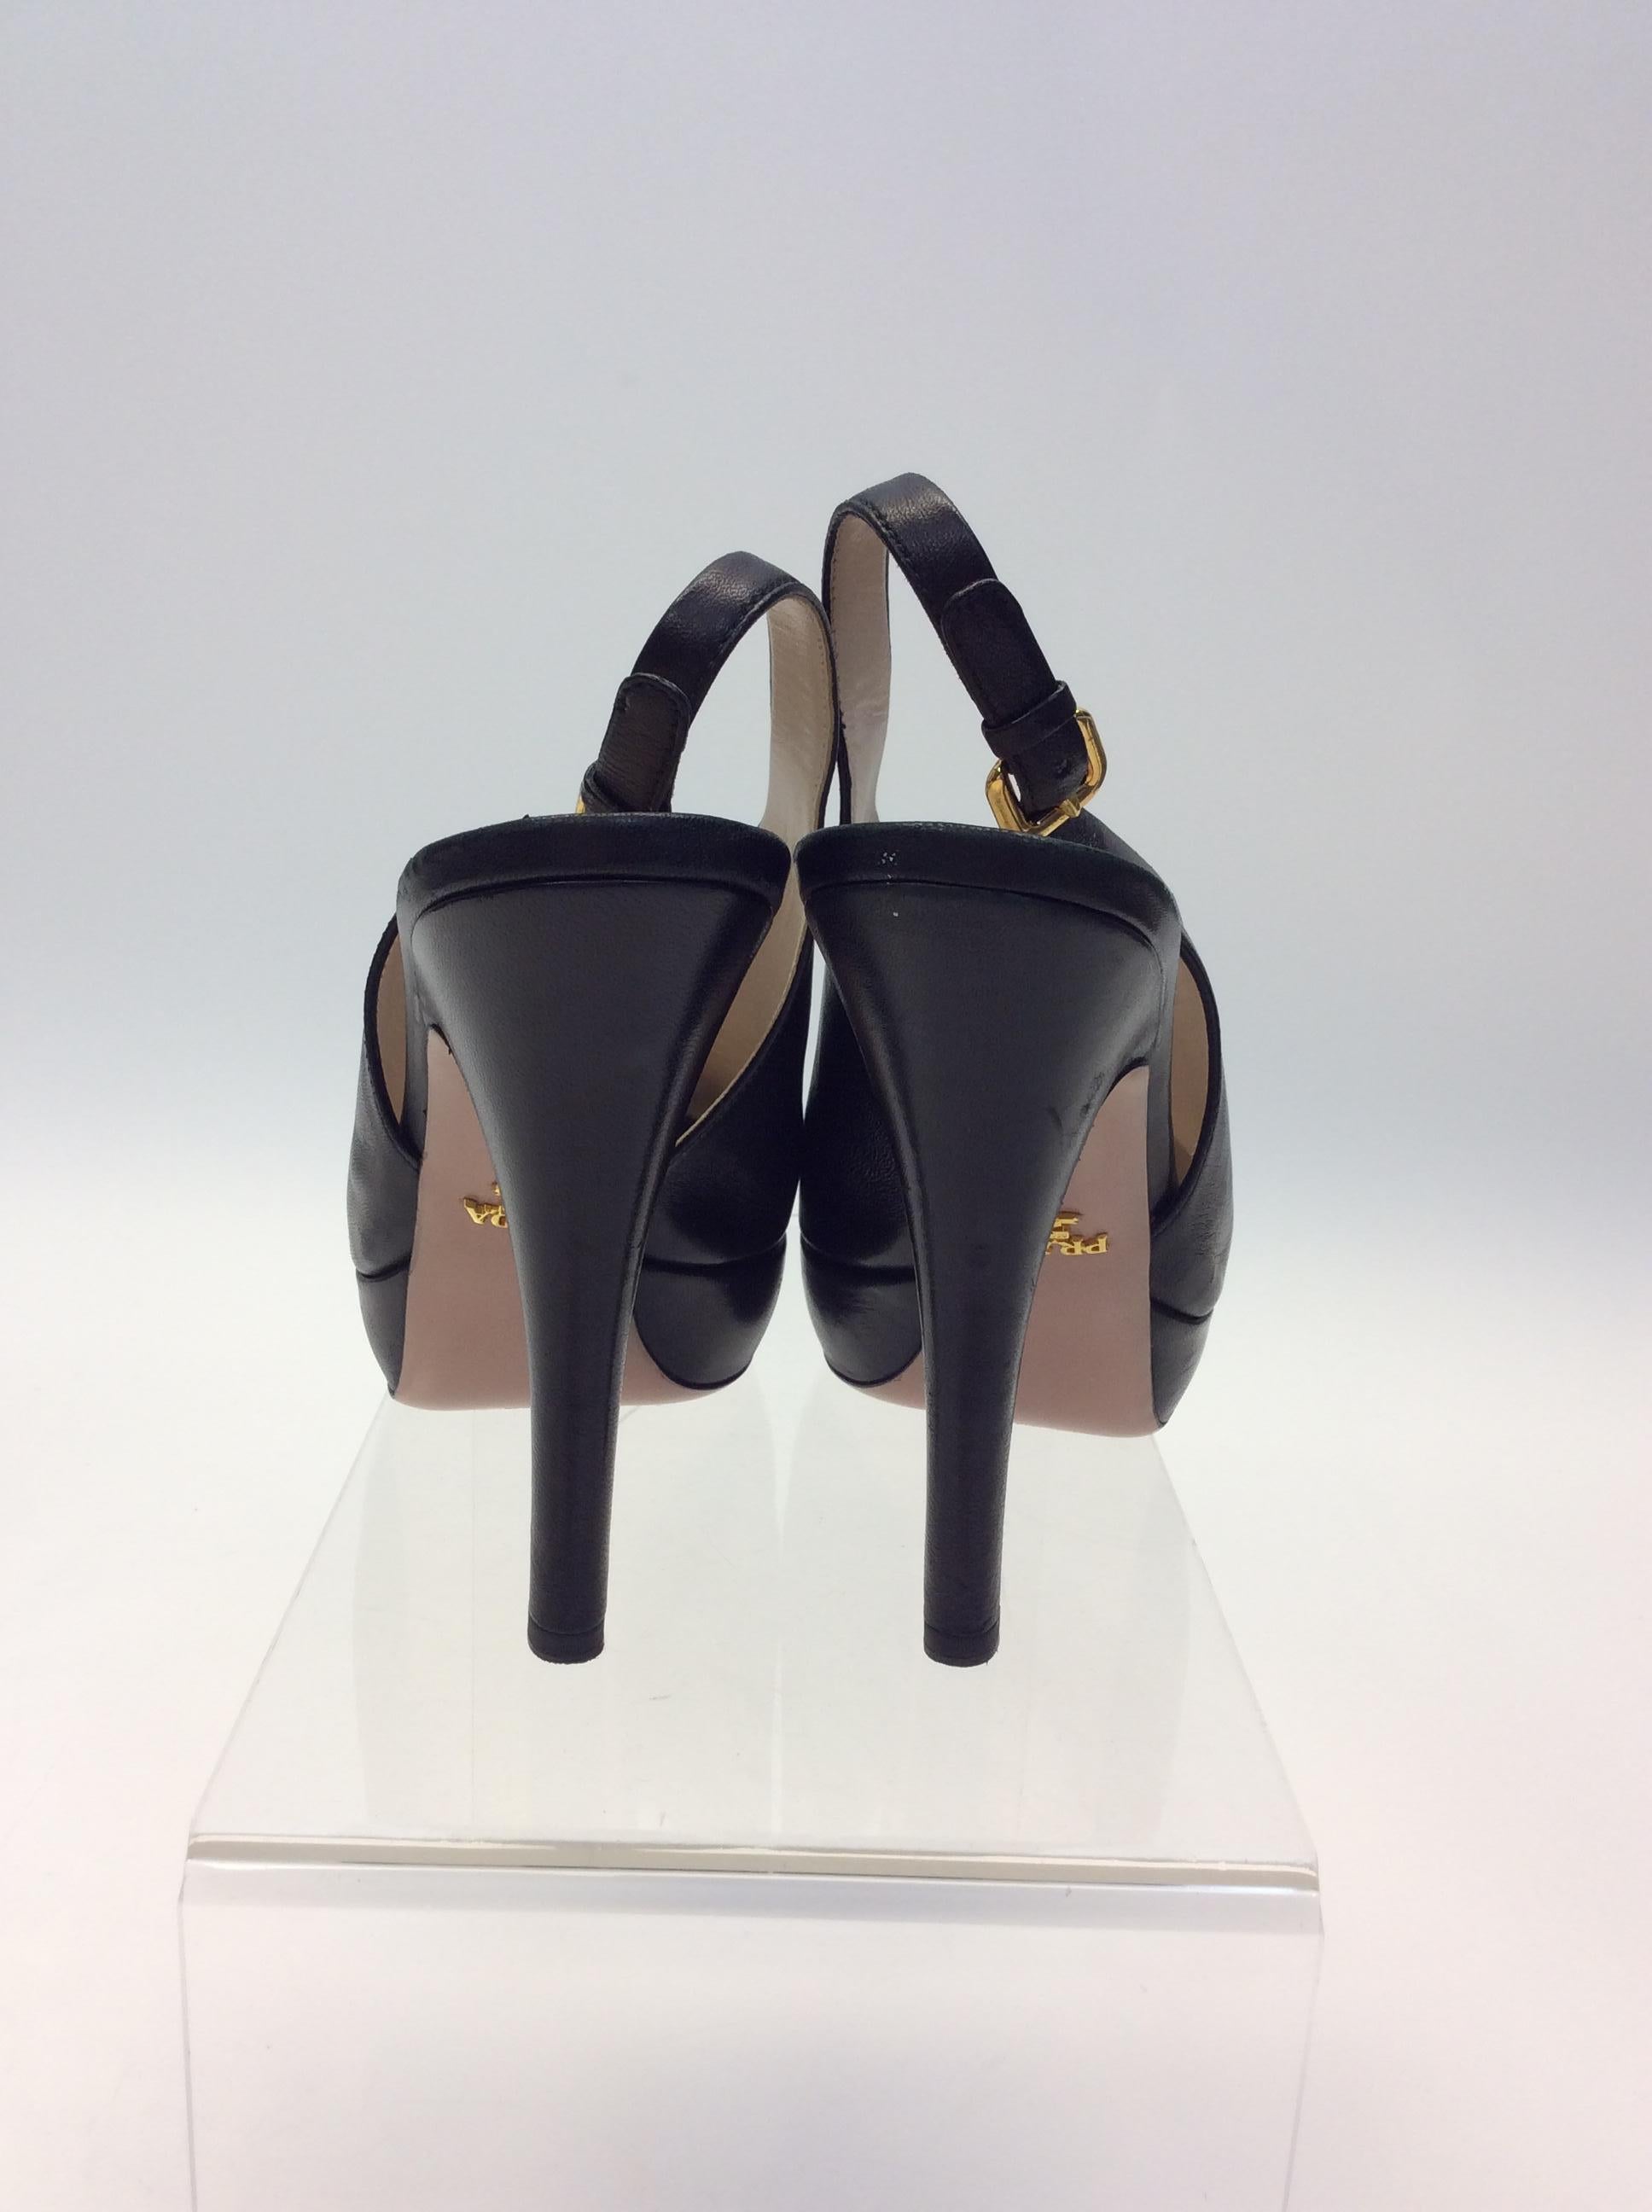 Prada Black Leather Peep Toe Heels In Good Condition For Sale In Narberth, PA